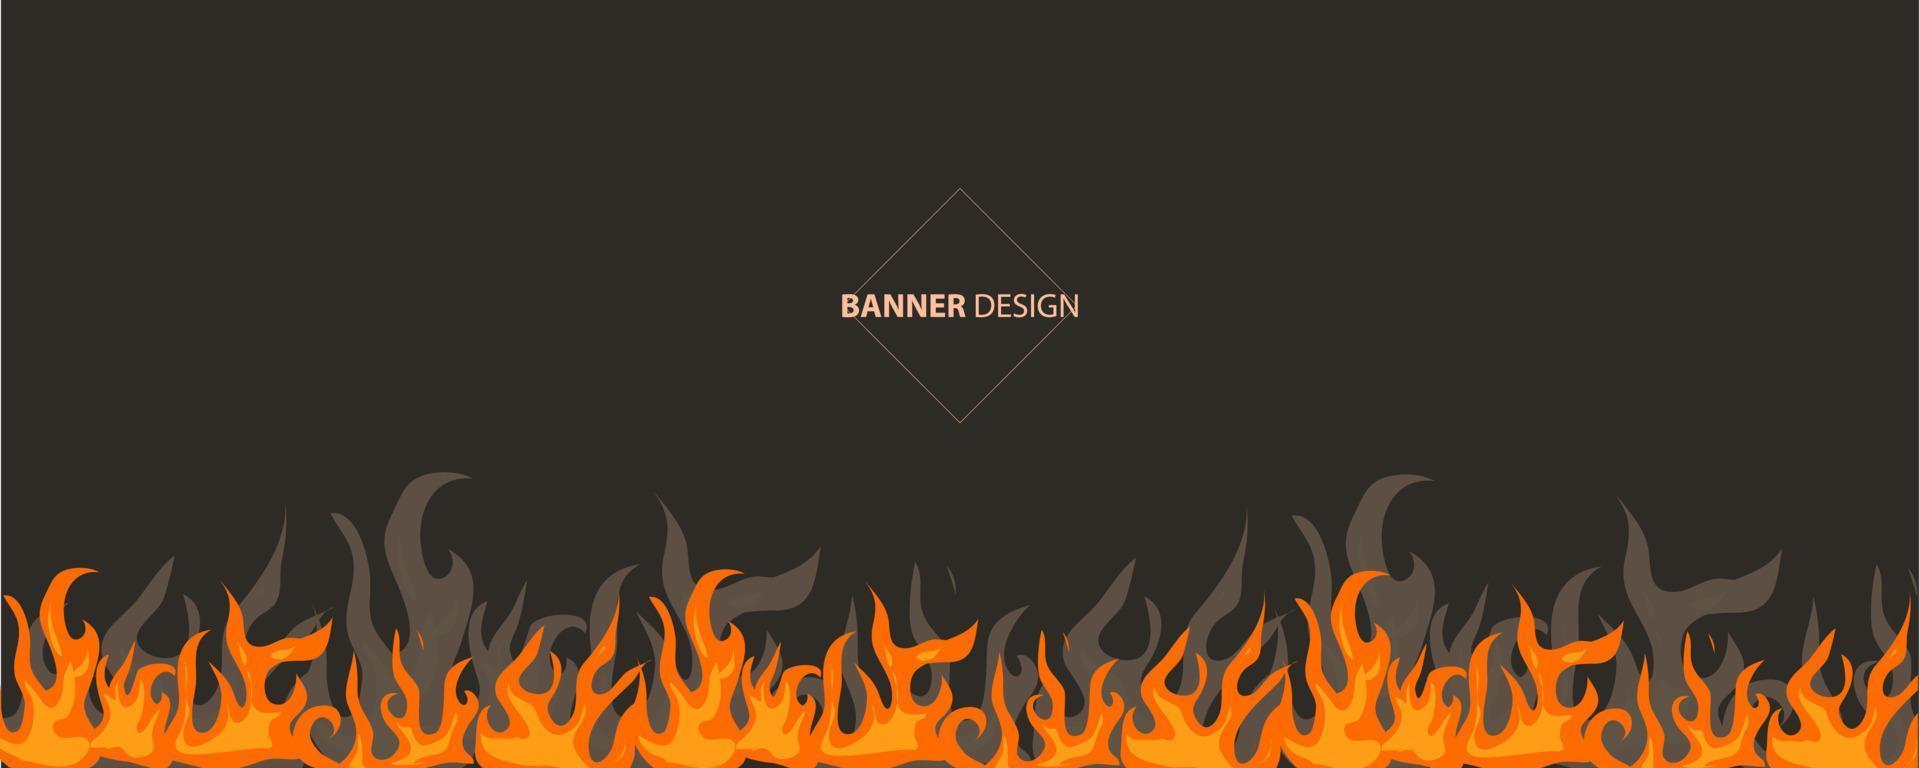 illustration of fire flame banner vector